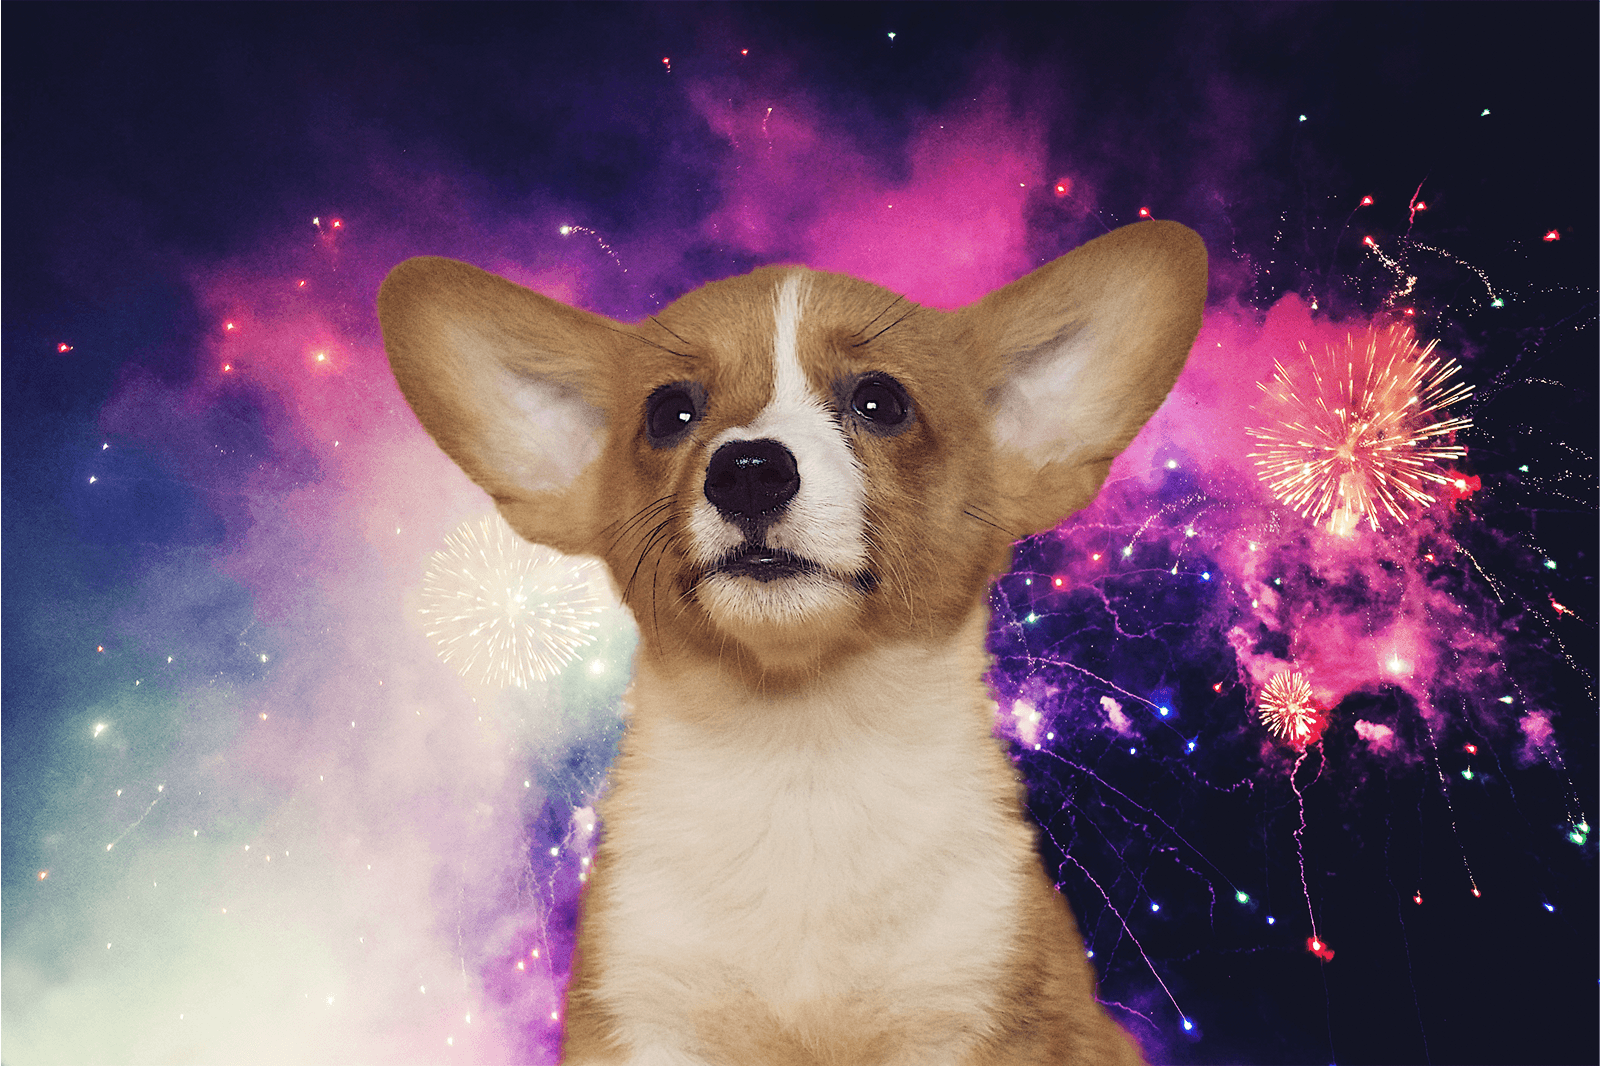 Does CBD Help Dogs with Fireworks? - FOCL